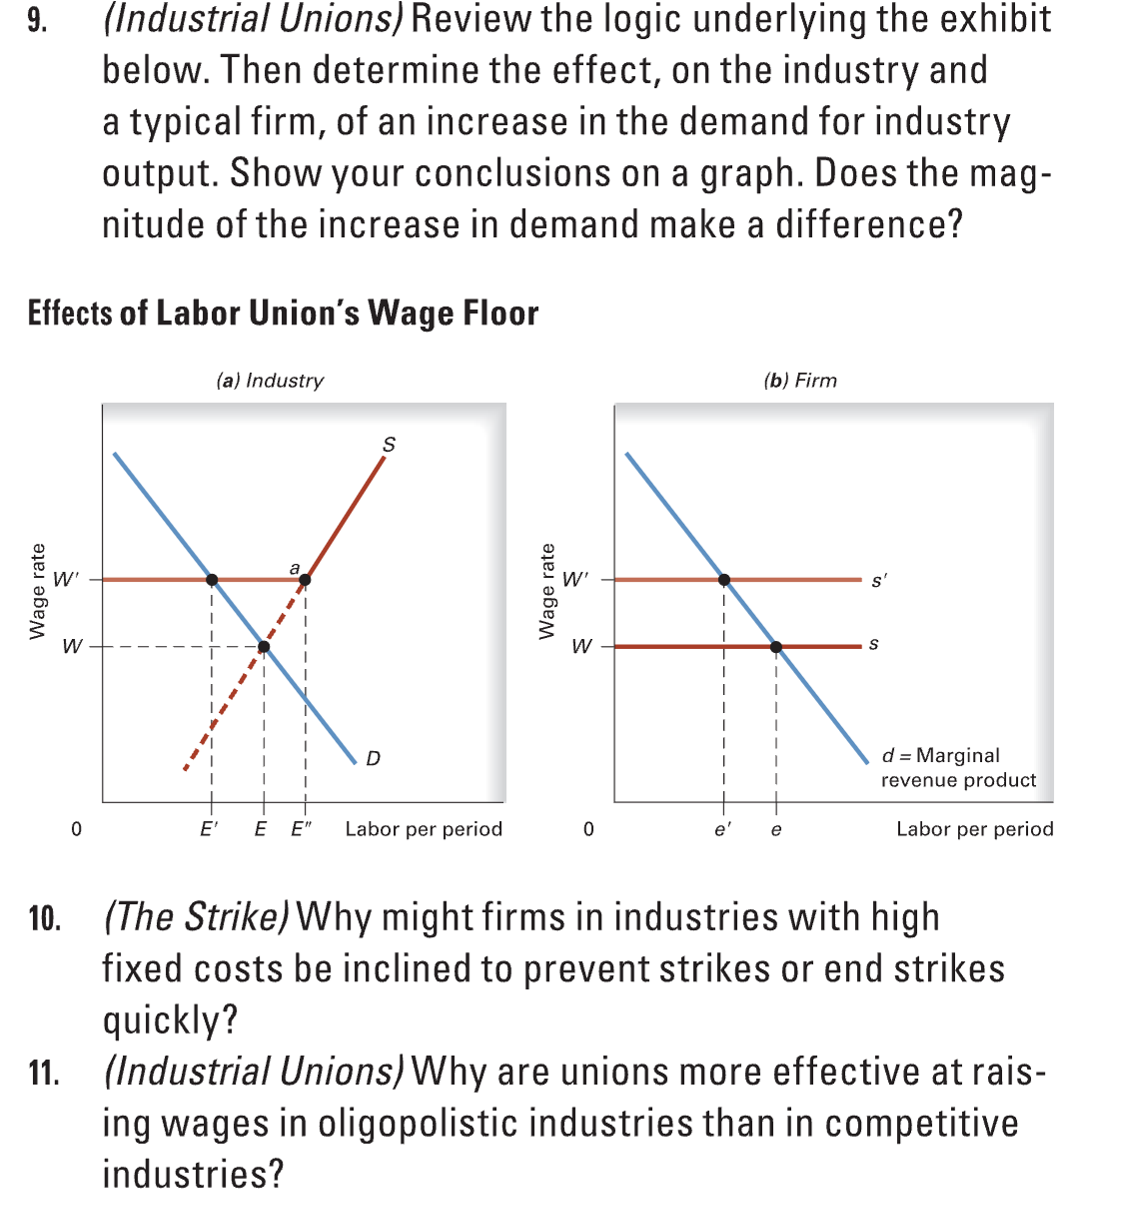 (Industrial Unions) Review the logic underlying the exhibit
below. Then determine the effect, on the industry and
9.
a typical firm, of an increase in the demand for industry
output. Show your conclusions on a graph. Does the mag-
nitude of the increase in demand make a difference?
Effects of Labor Union's Wage Floor
(a) Industry
(b) Firm
s'
W
d = Marginal
revenue product
D
E'
E E"
Labor per period
Labor per period
Wage rate
Wage rate
